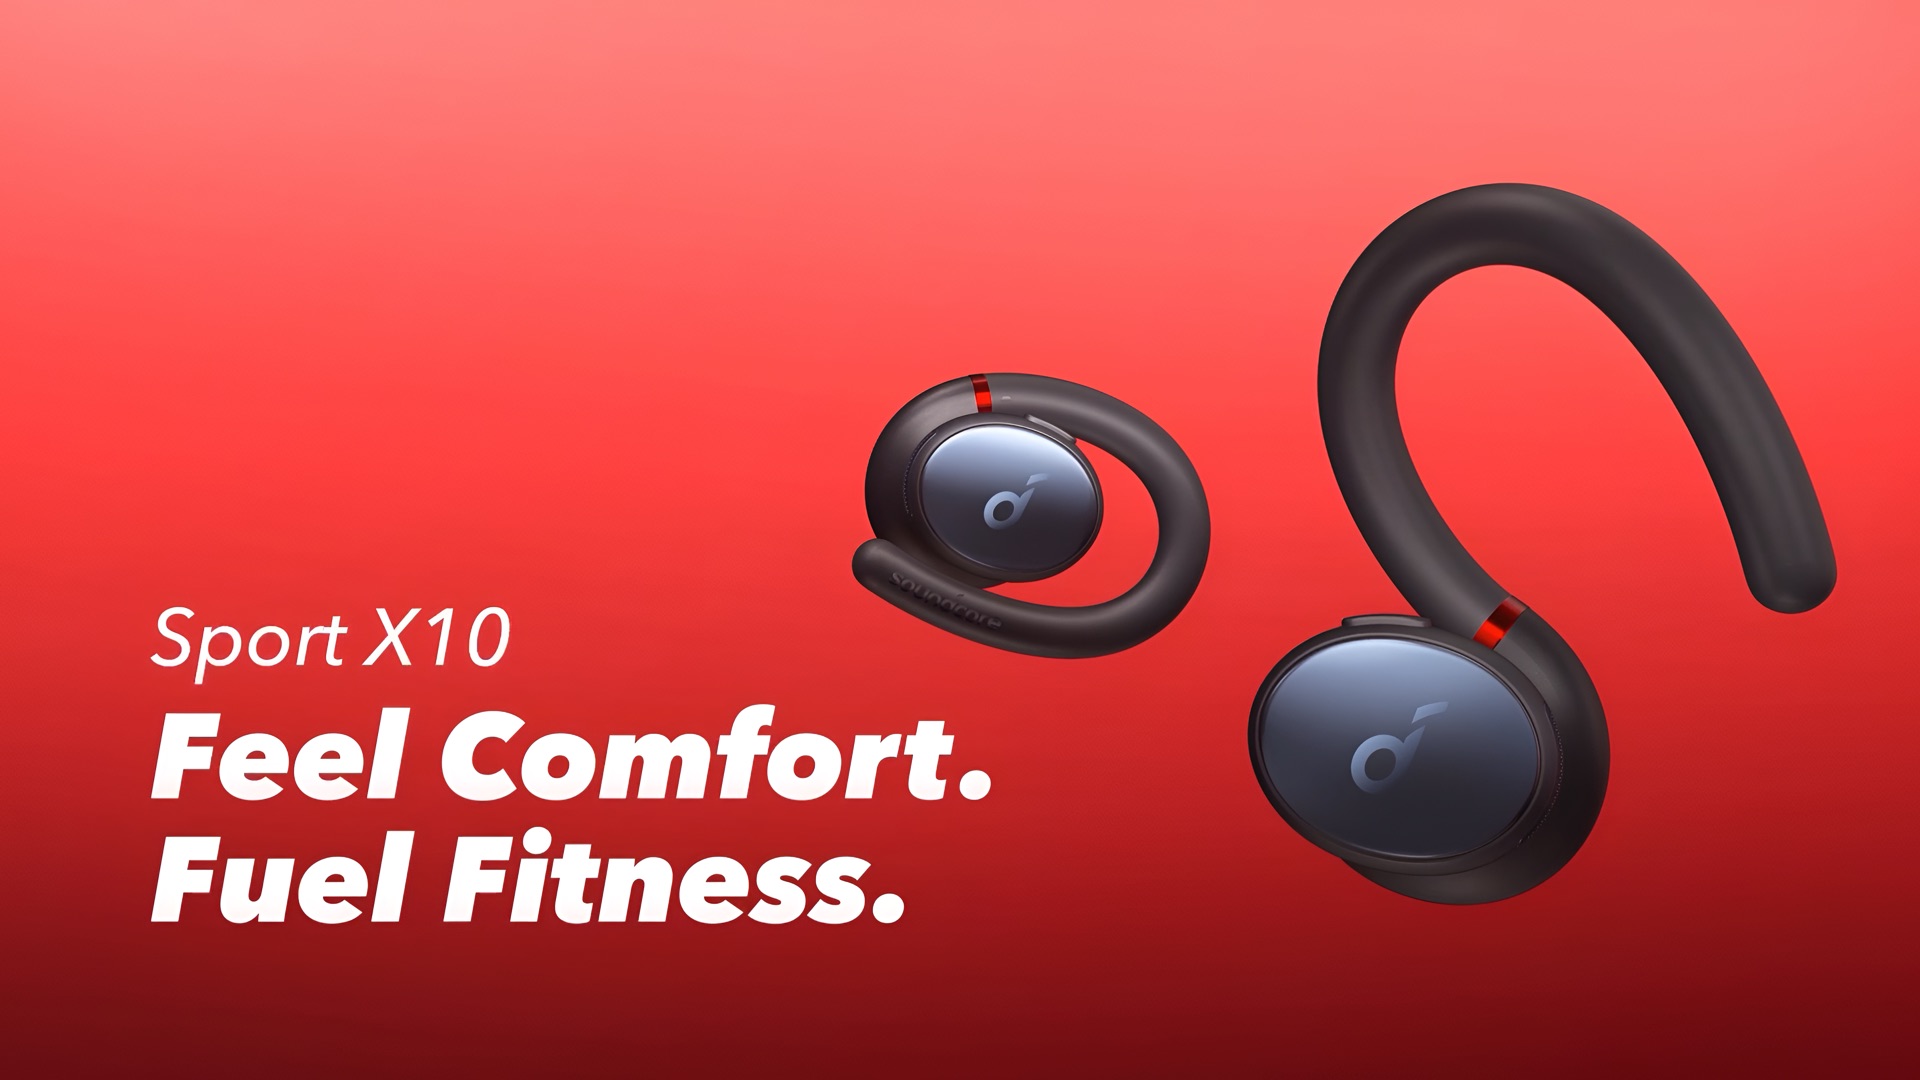 Soundcore by Anker Sport X10 All-New Workout Earbuds